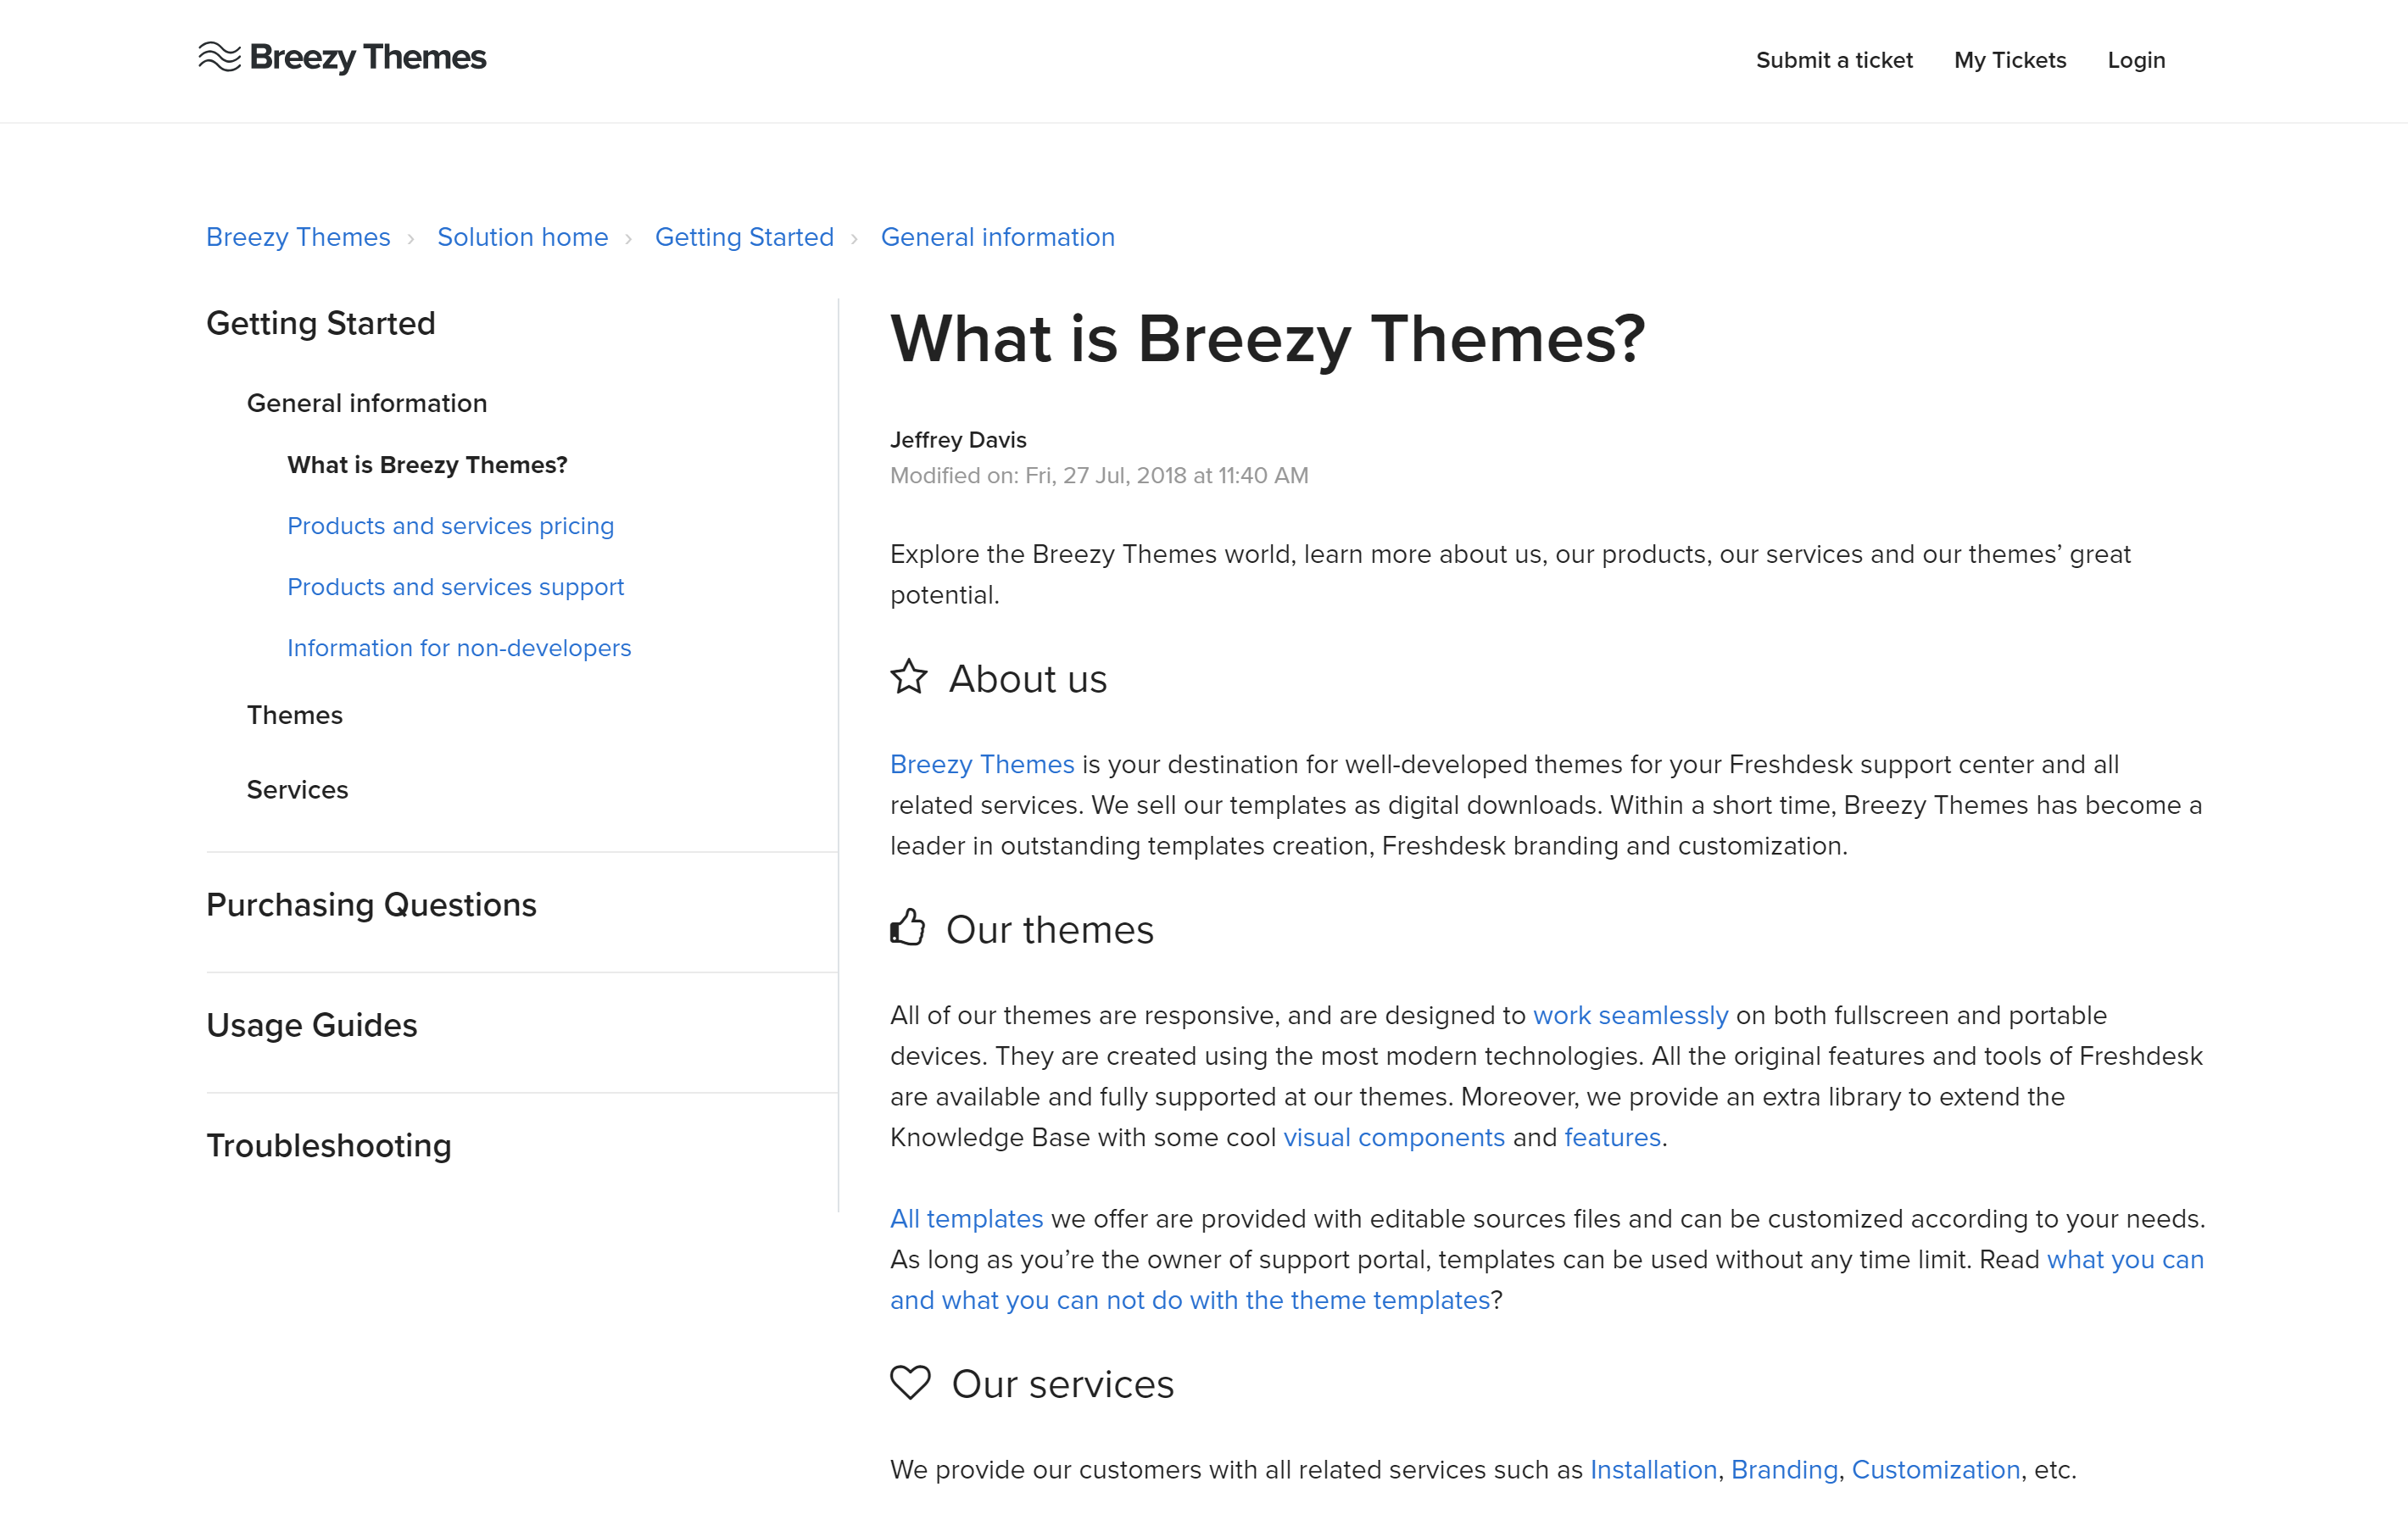 Article page on a Freshdesk theme customized by Breezy Themes